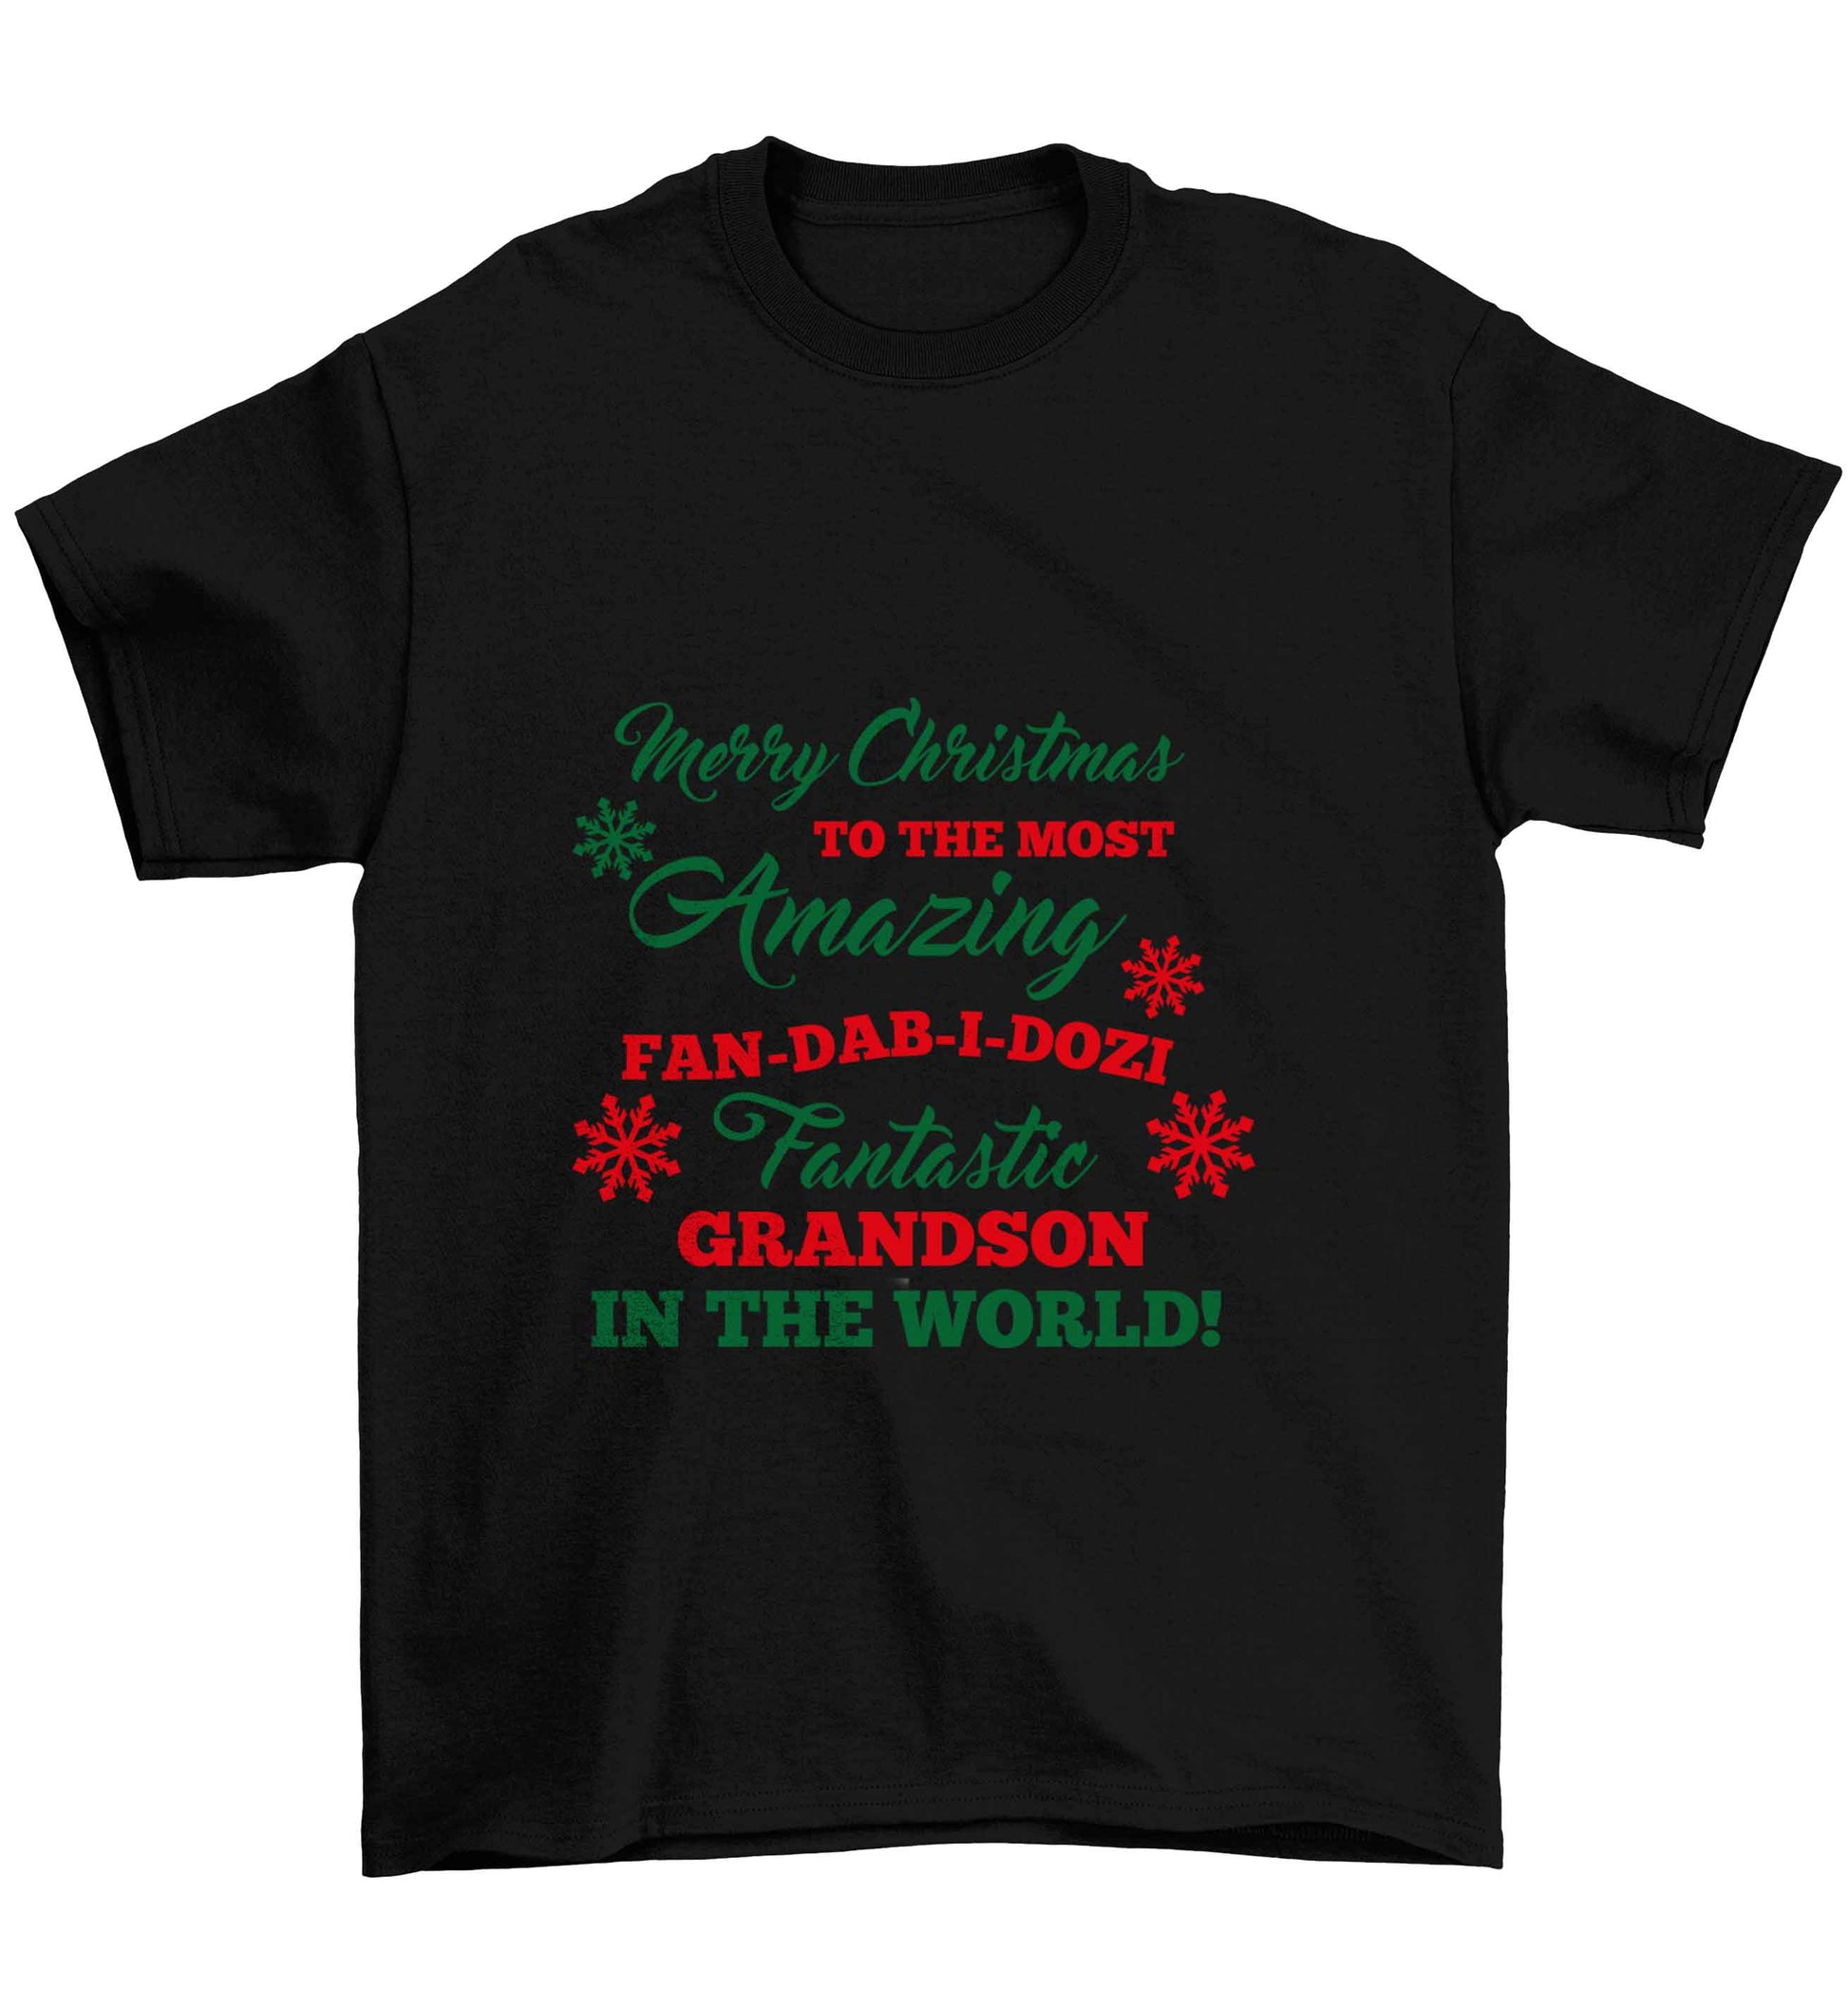 Merry Christmas to the most amazing fan-dab-i-dozi fantasic Grandson in the world Children's black Tshirt 12-13 Years